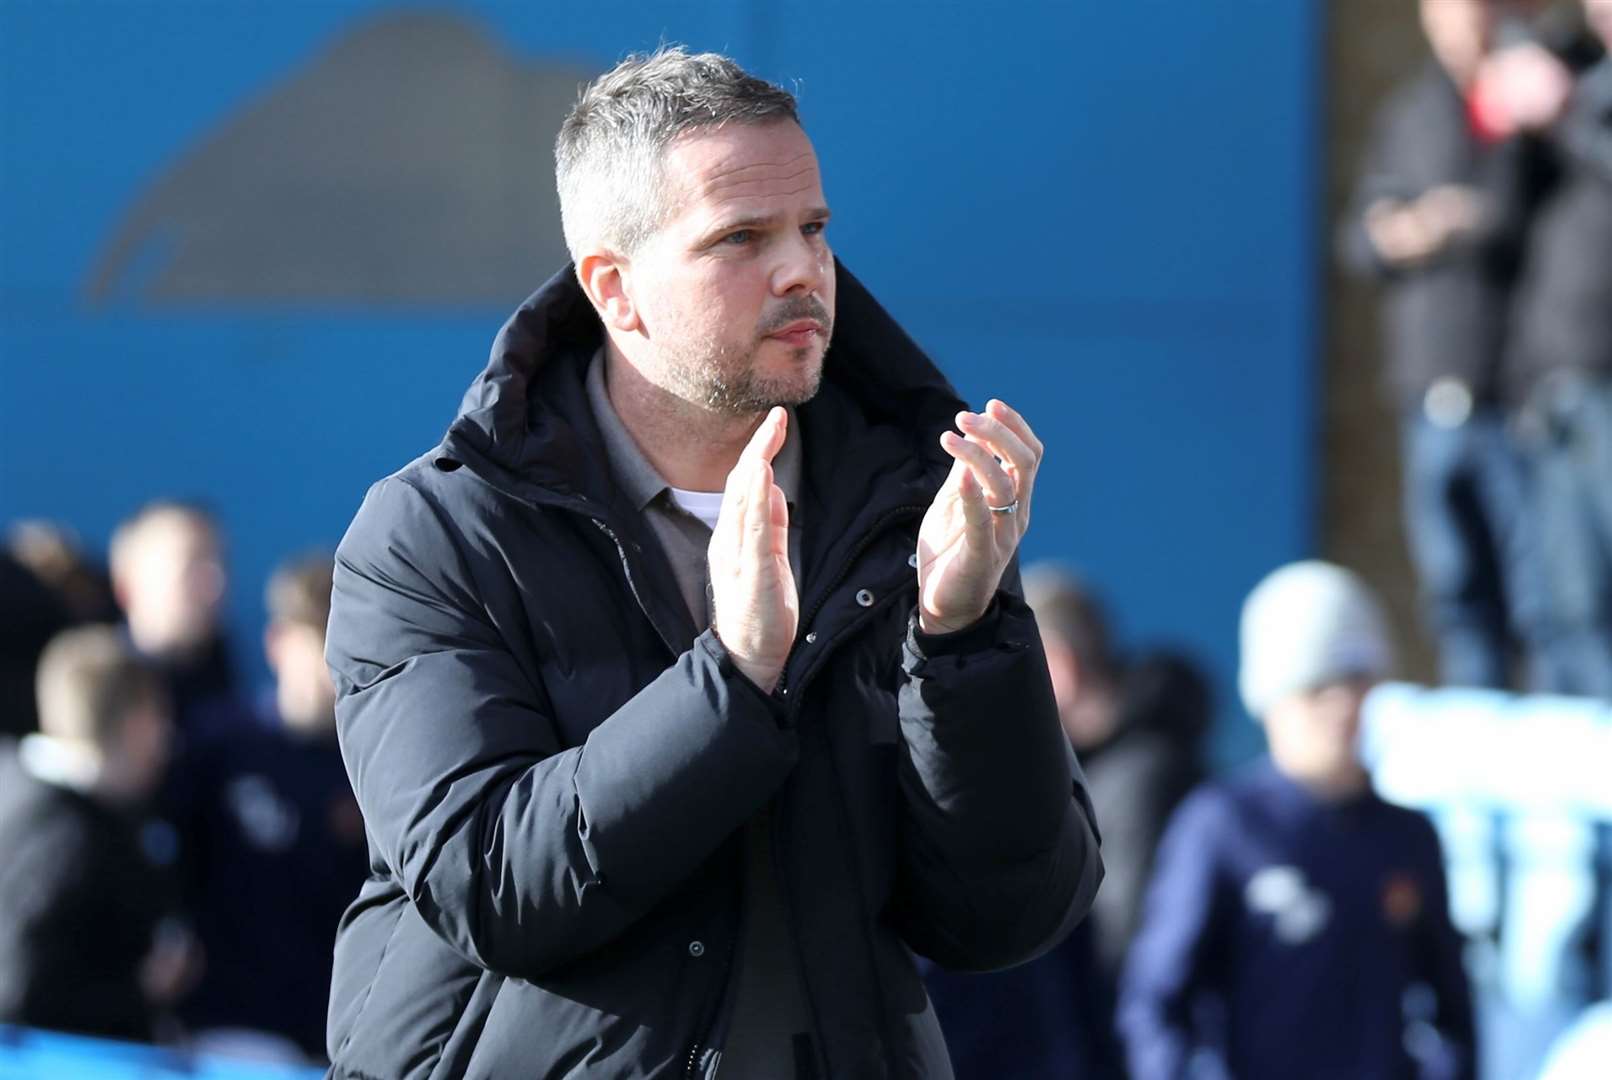 Gillingham head coach Stephen Clemence enjoyed watching his side go toe-to-toe with Wrexham and win Picture: @Julian_KPI